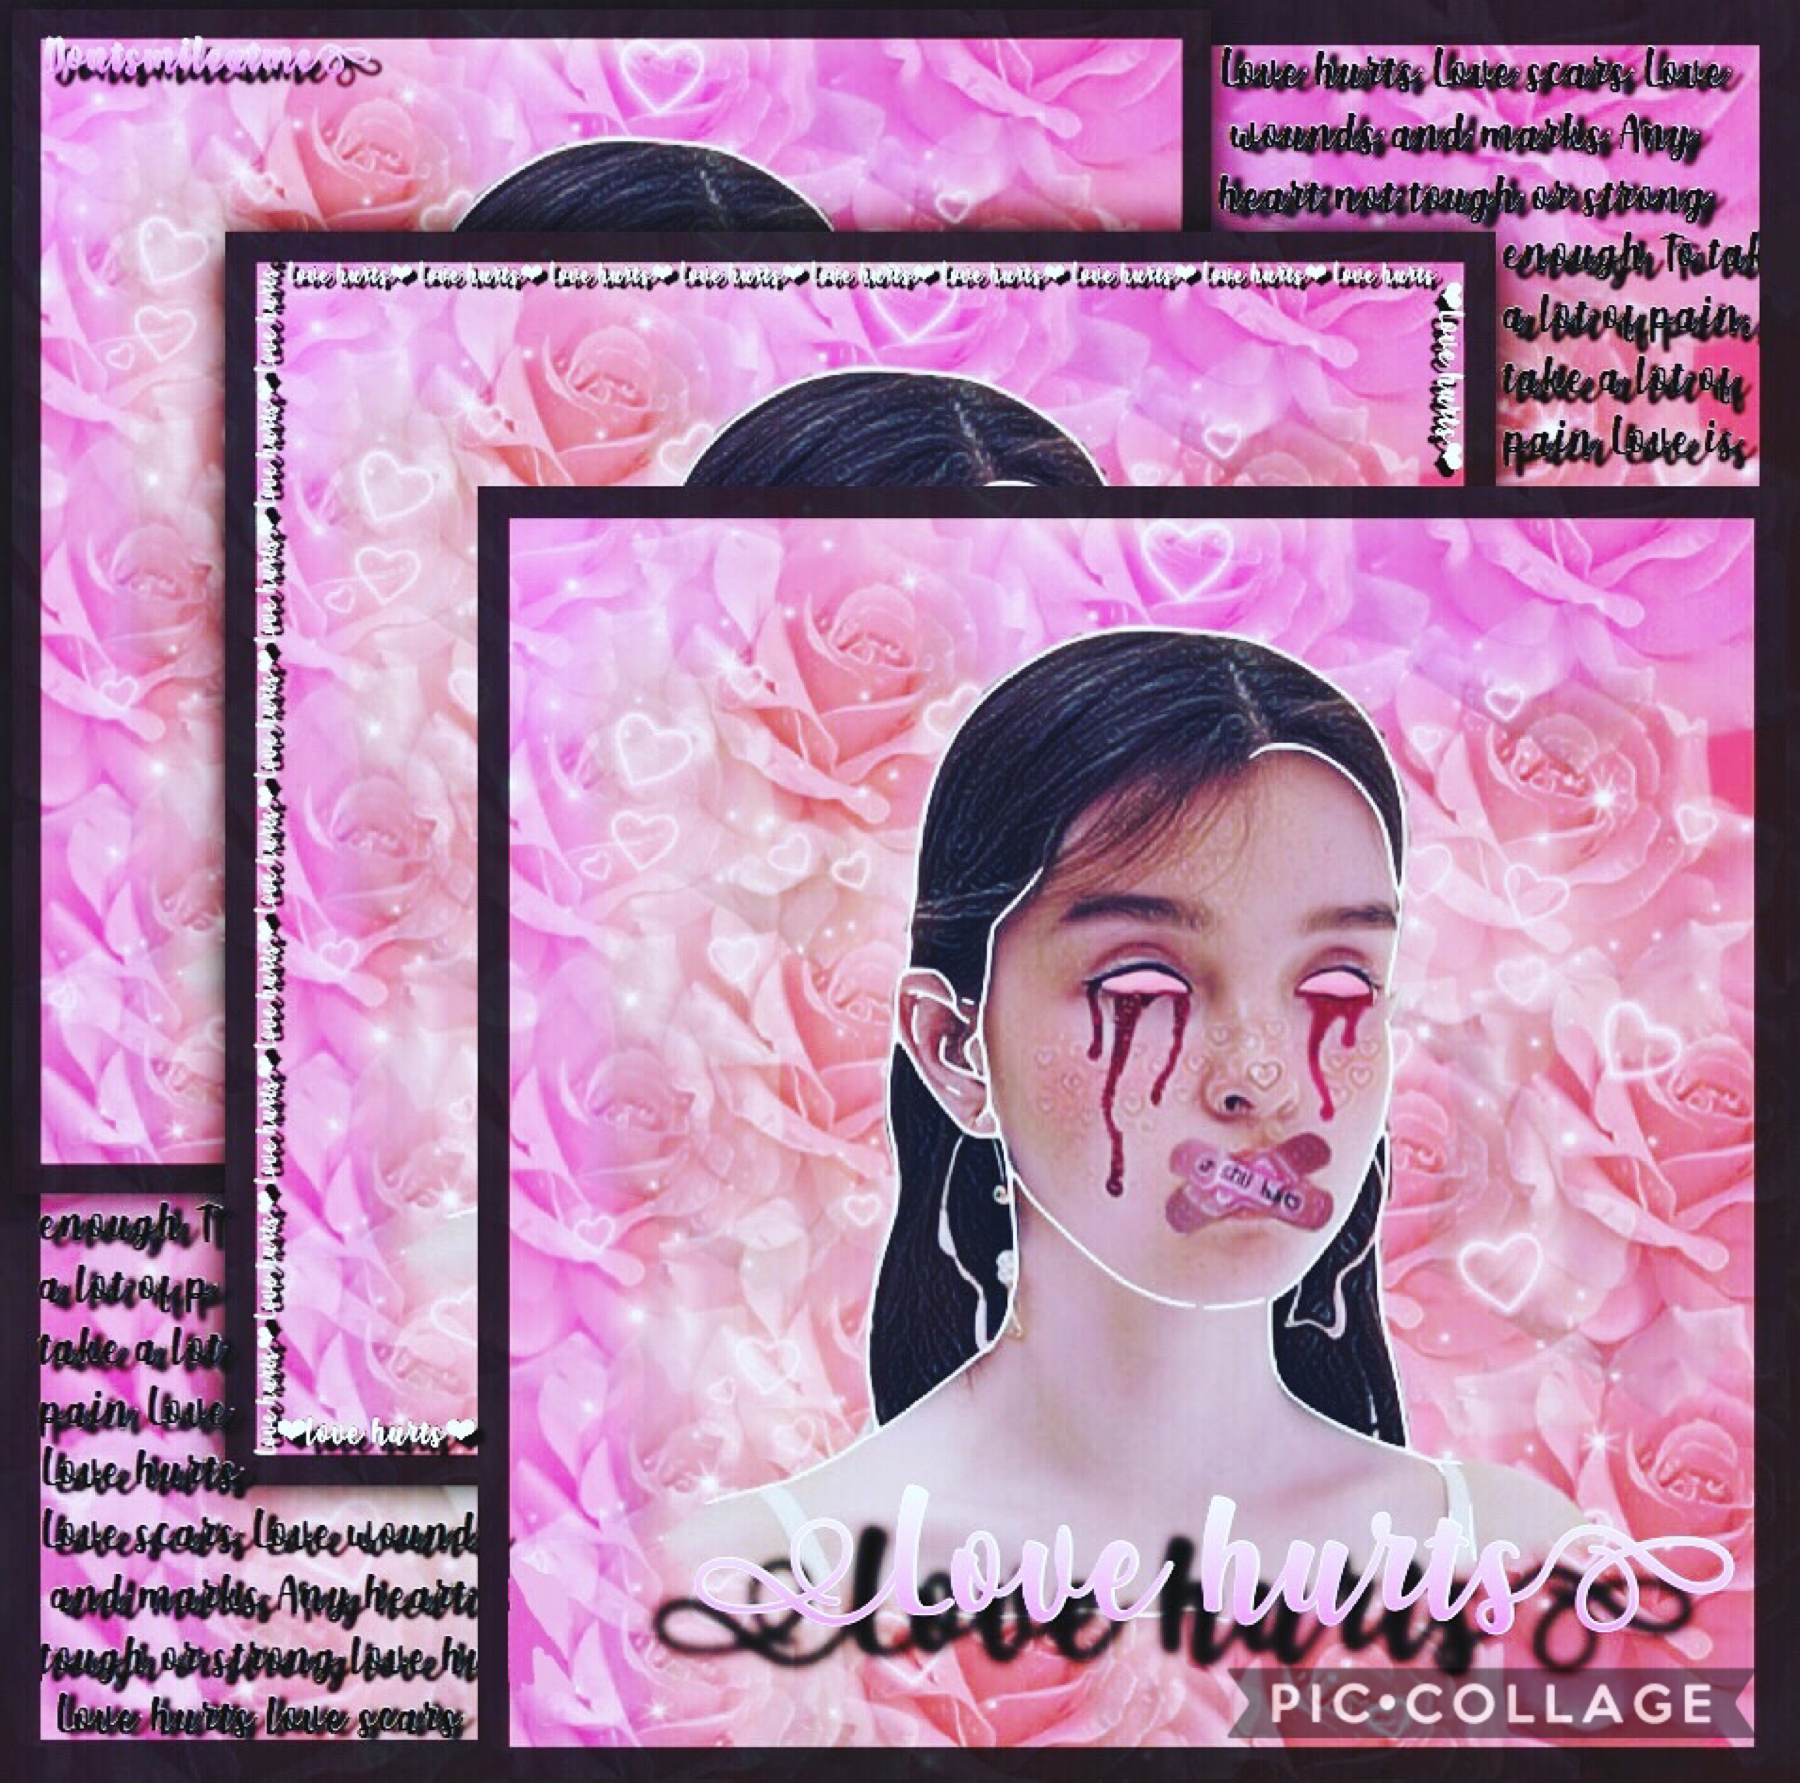 🌸💖tap💖🌸
❤️Rate /10❤️
Lyrics🌺-love hurts-🌺
Don’t like this one but had to post something! I promise I will get better at posting😂please comment requests or remix a picture of a person you want me to edit:)! I’m running out of ideas:/⬇️⬇️⬇️
